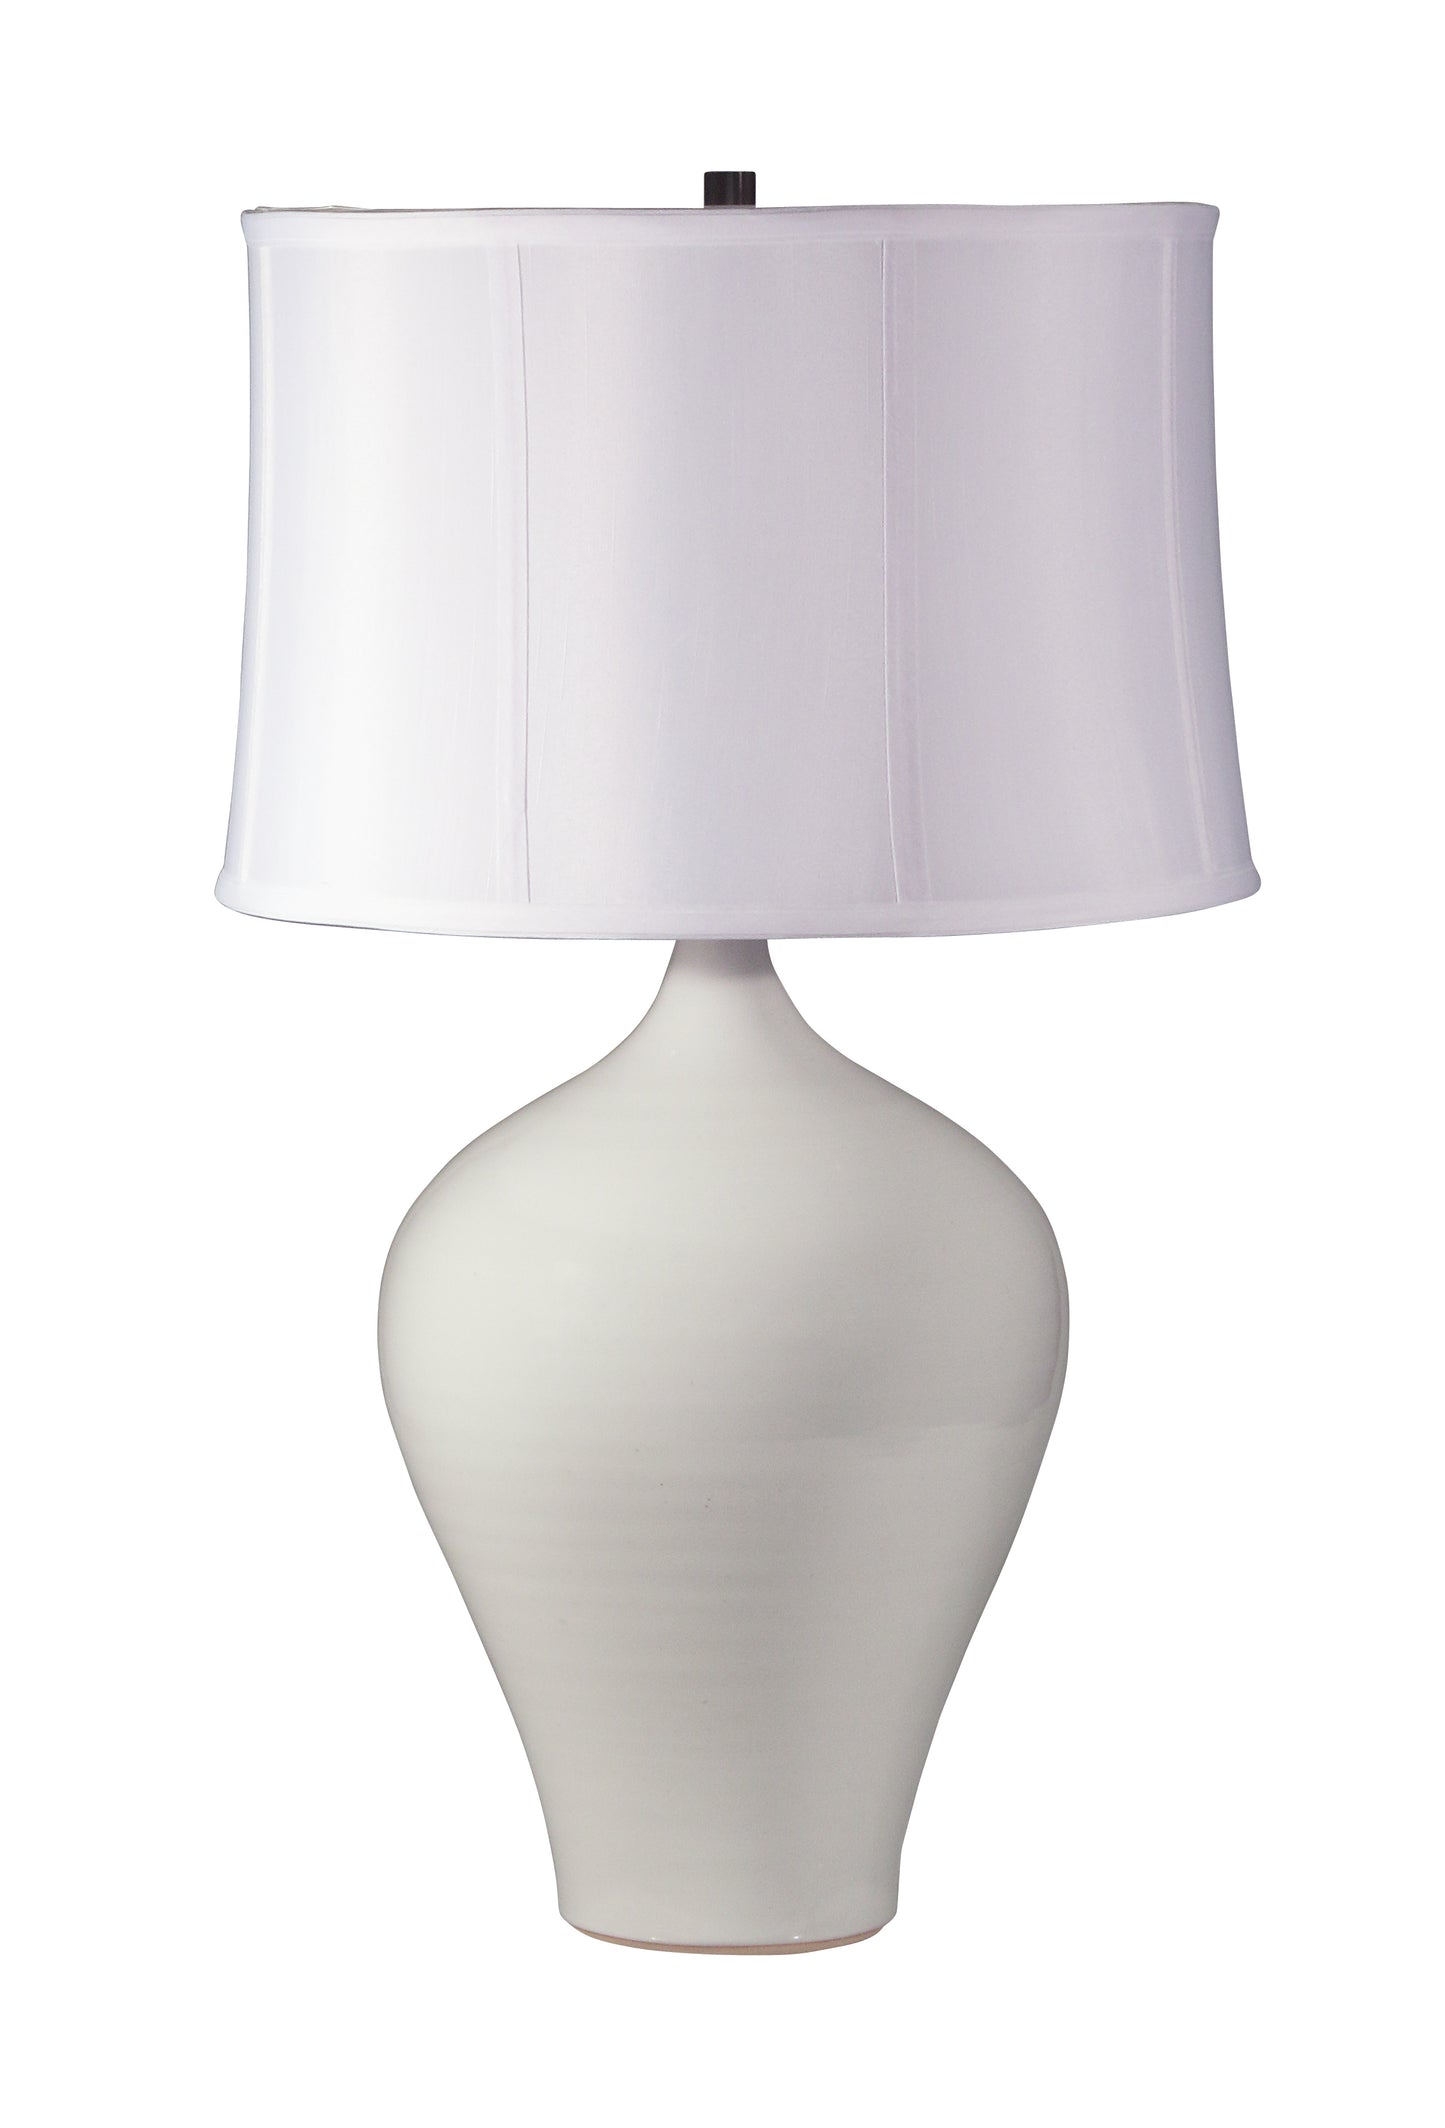 House of Troy Scatchard 25" Stoneware Table Lamp in White Gloss GS160-WG